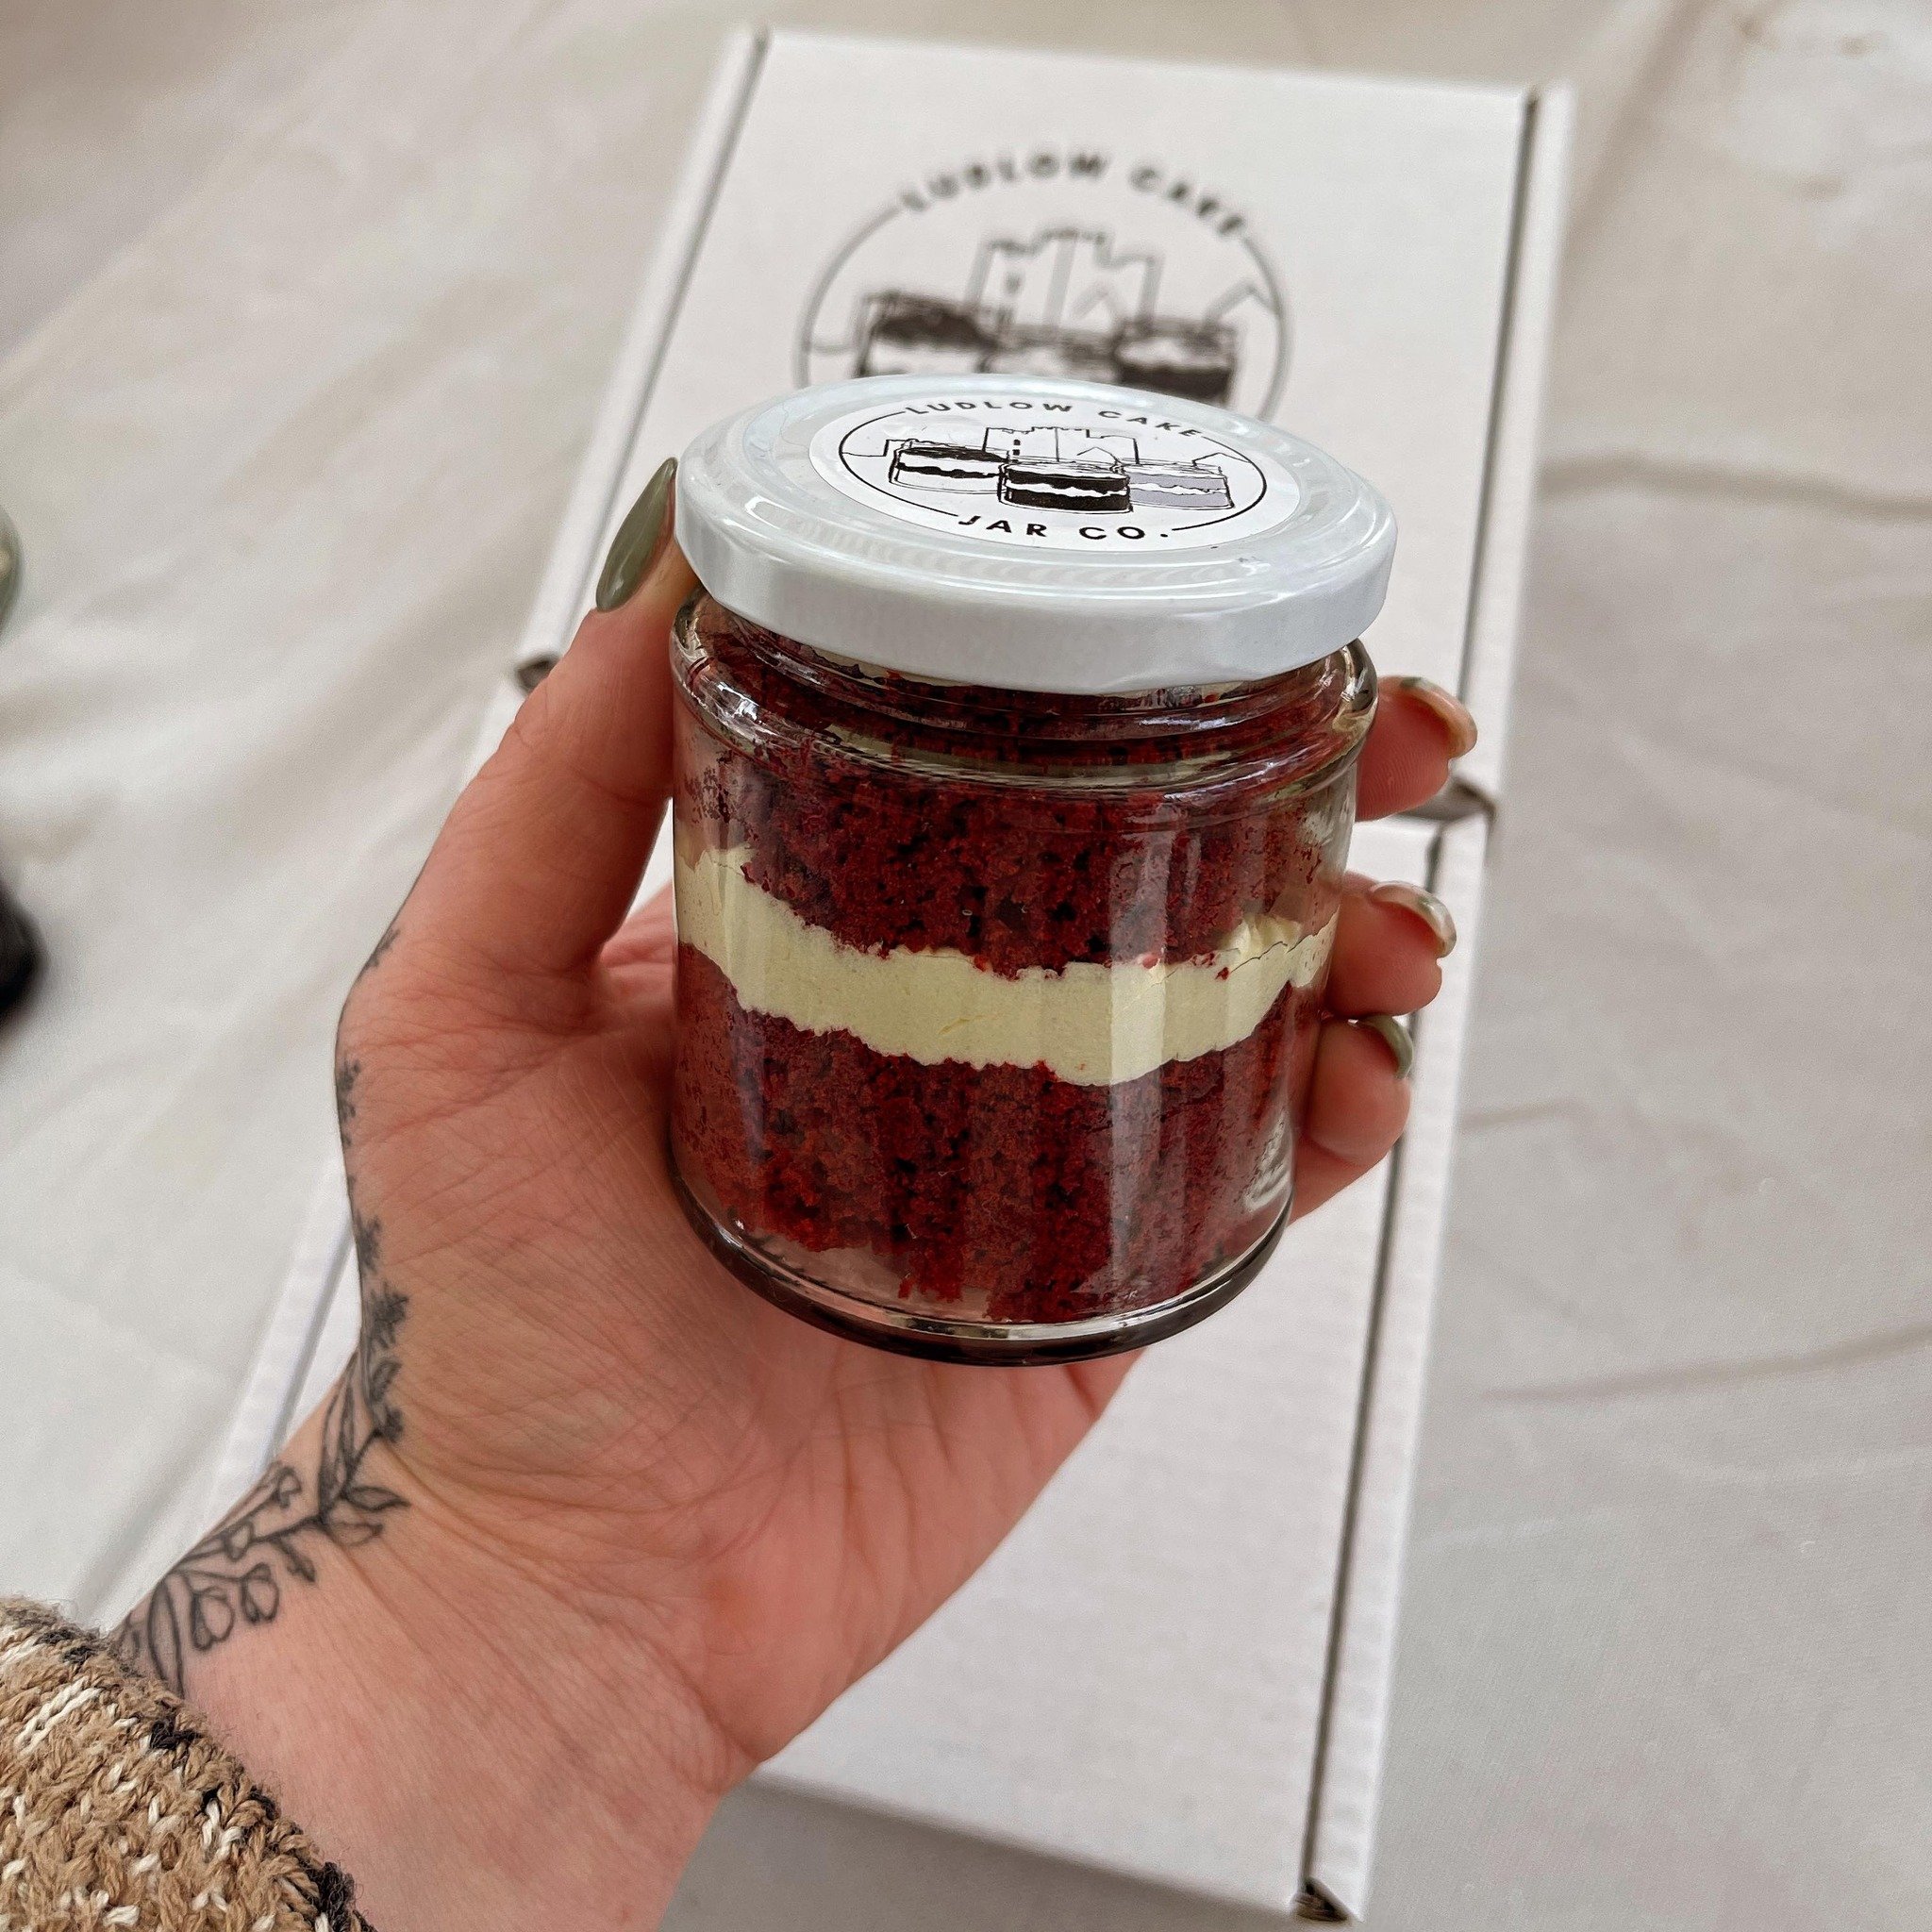 Who doesn&rsquo;t love a Red Velvet cake jar?? 😍

Modelled by @lavendermoonaltar 😇

Don&rsquo;t forget find us on @ludlow.market this Friday and Saturday 🥳 We&rsquo;ll even have a cheeky new flavour on 🤪

#cakeinajar #redvelvetcake #redvelvet #ca